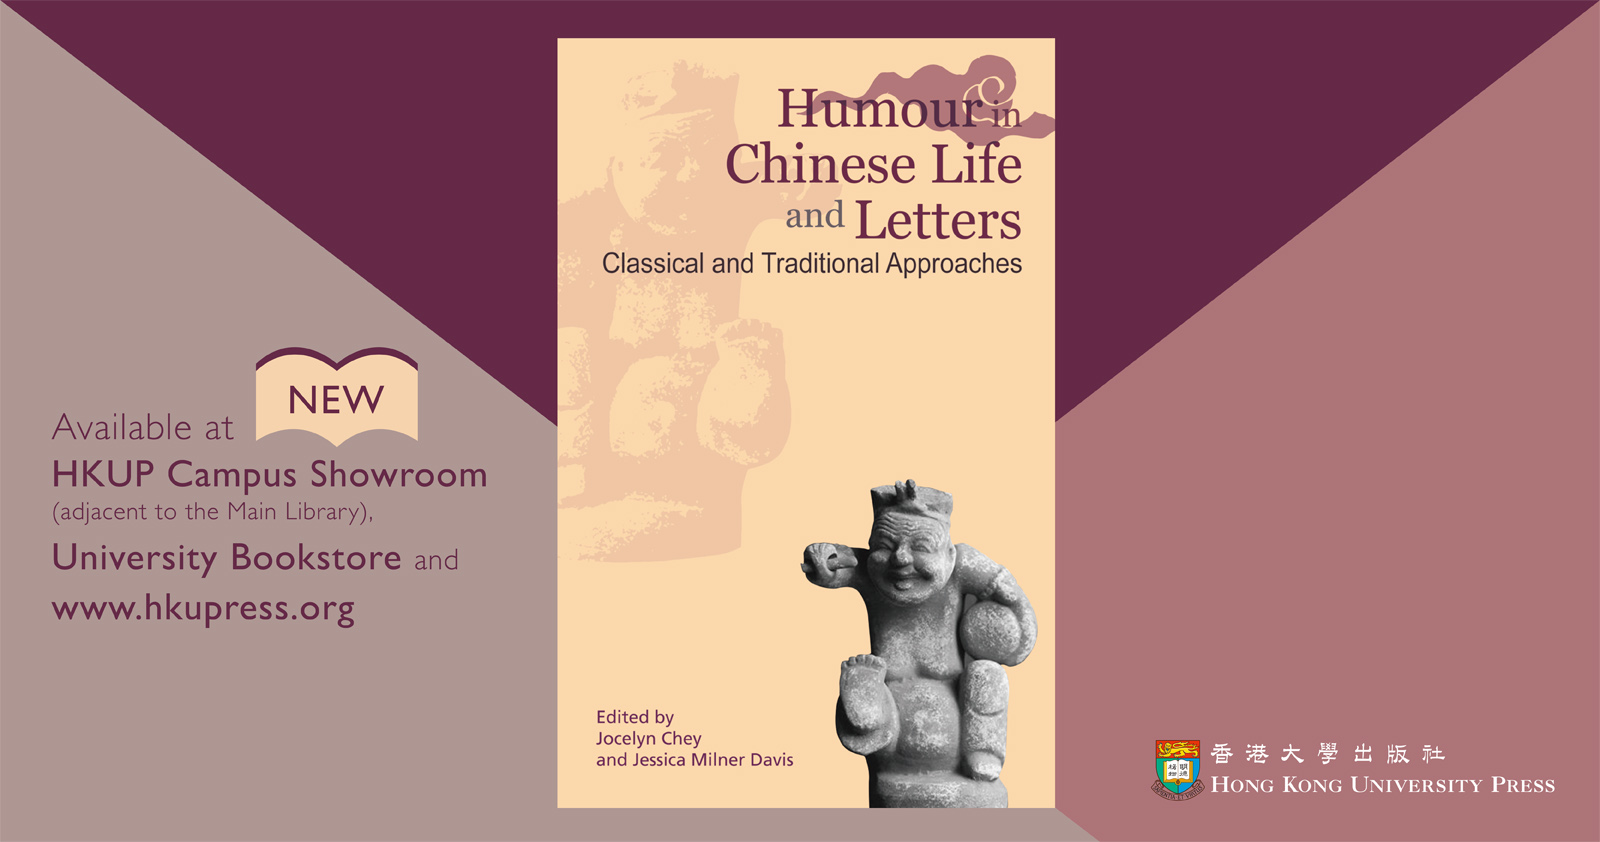 New Book from HKUP - Humour in Chinese Life and Letters